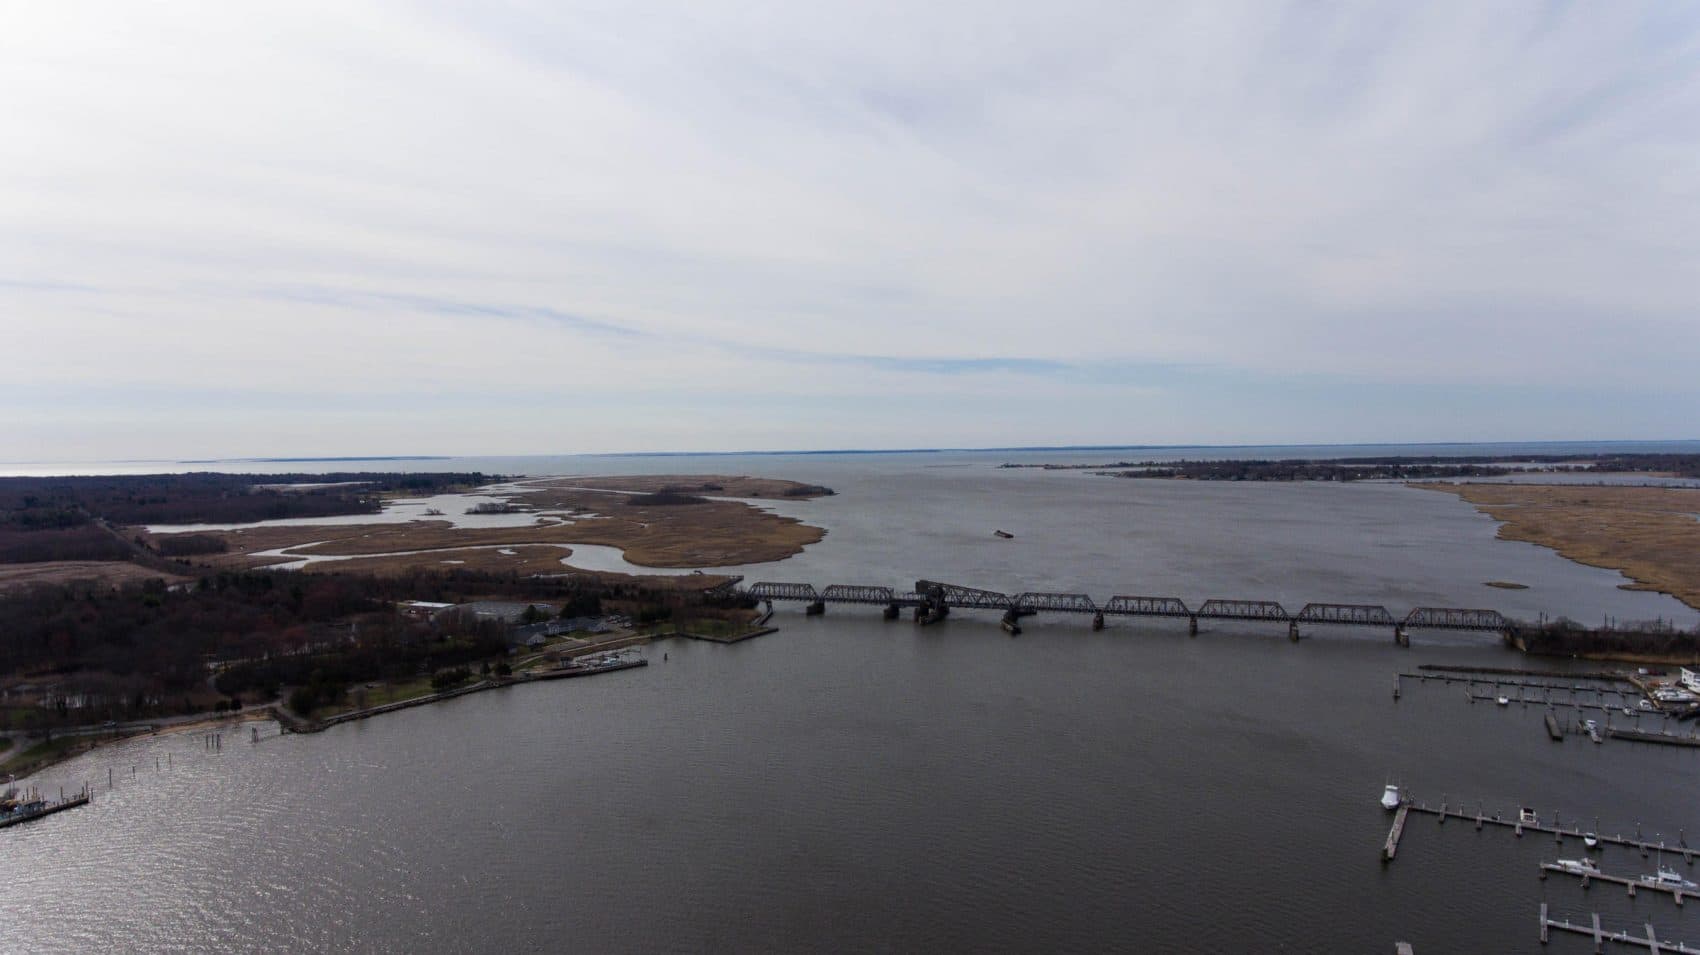 The mouth of the Connecticut River at Old Saybrook and Old Lyme, Conn. The Amtrak bridge is the last crossing before the river meets Long Island Sound. (Courtesy Ryan Caron King/NENC)